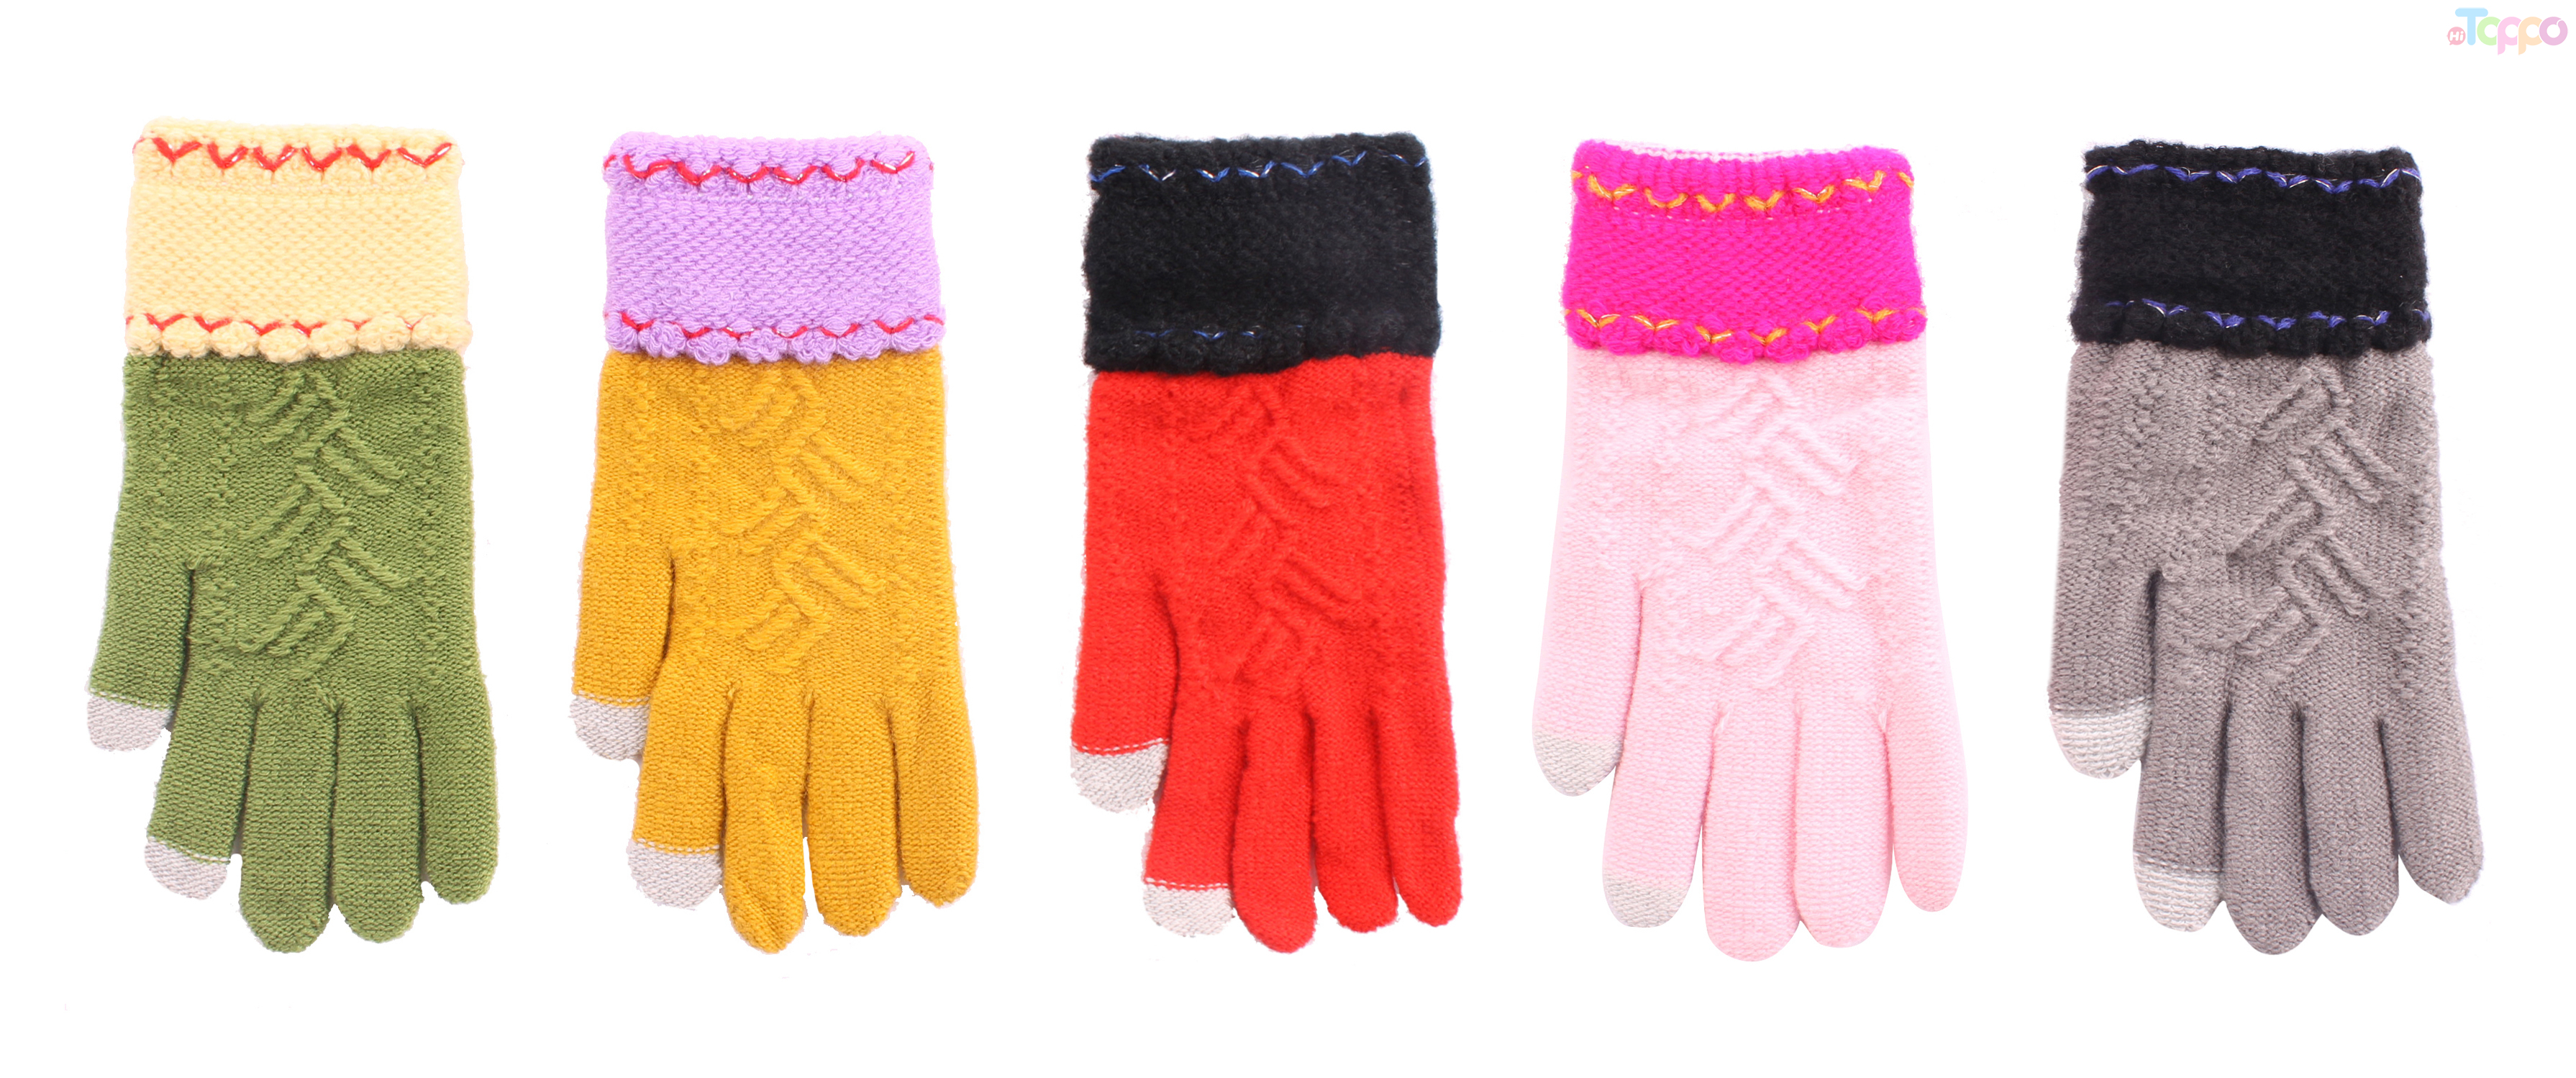 Hot Sale Funny Winter Female Warmer Acrylic Knitted Magic Gloves Touch Screen Gloves Fashion Jacquard for Discount